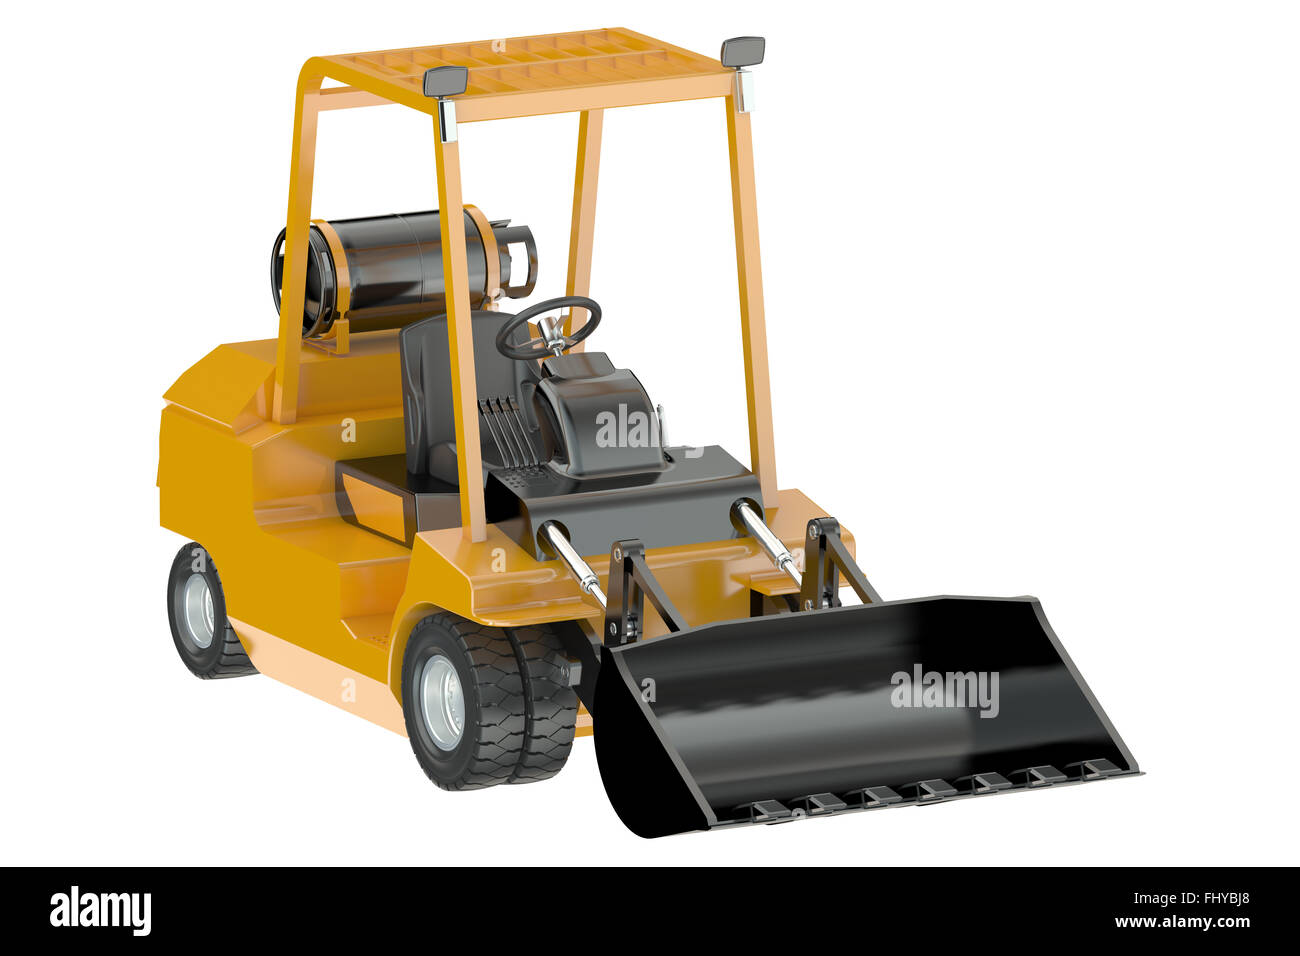 Skid-steer loader isolated on white background Stock Photo